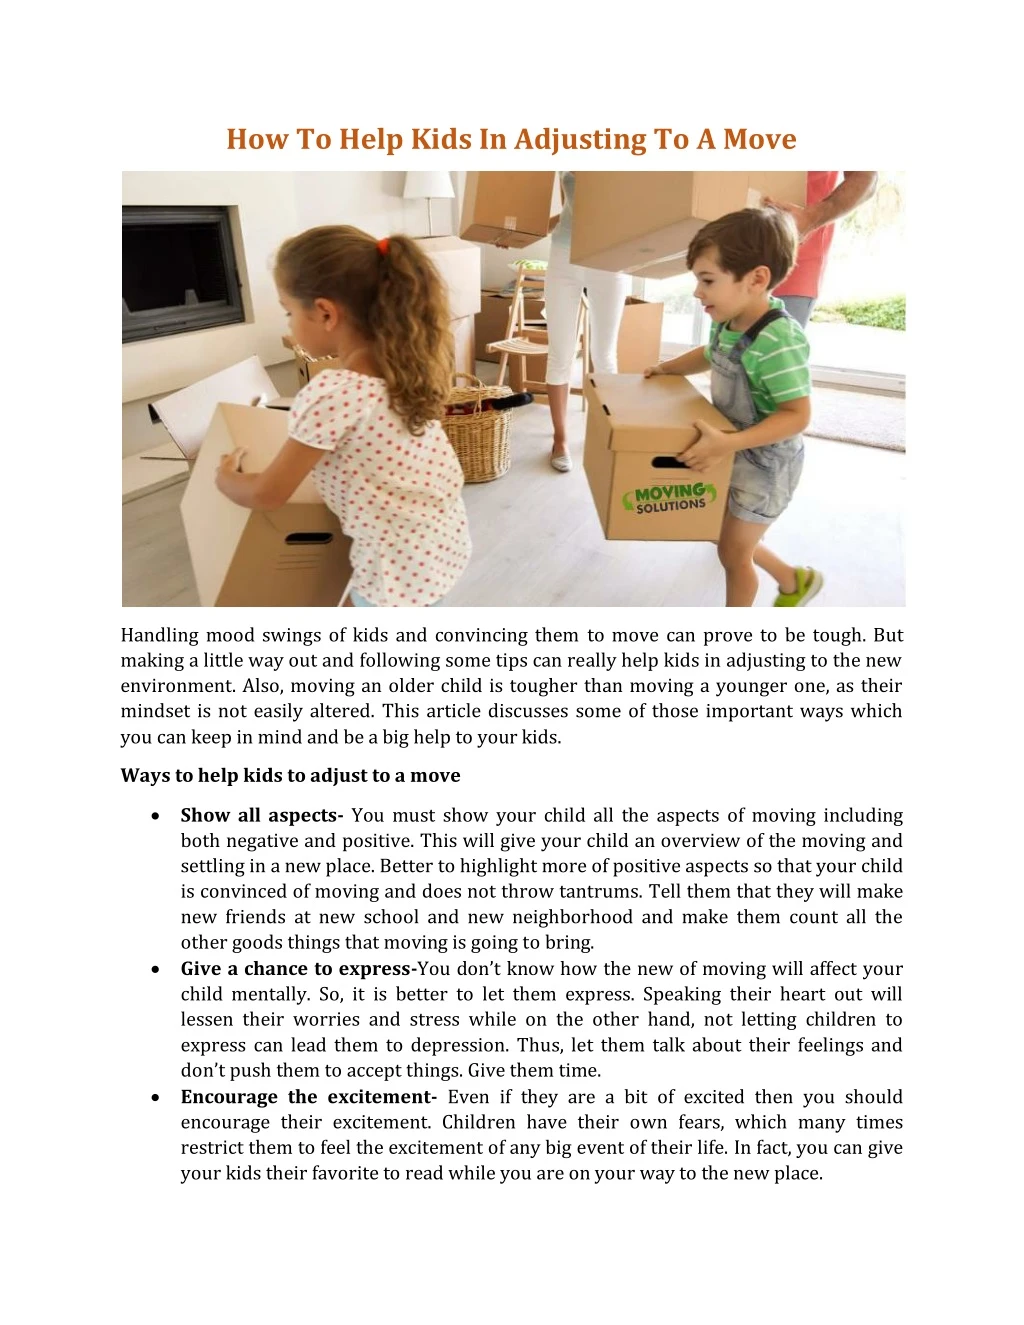 how to help kids in adjusting to a move